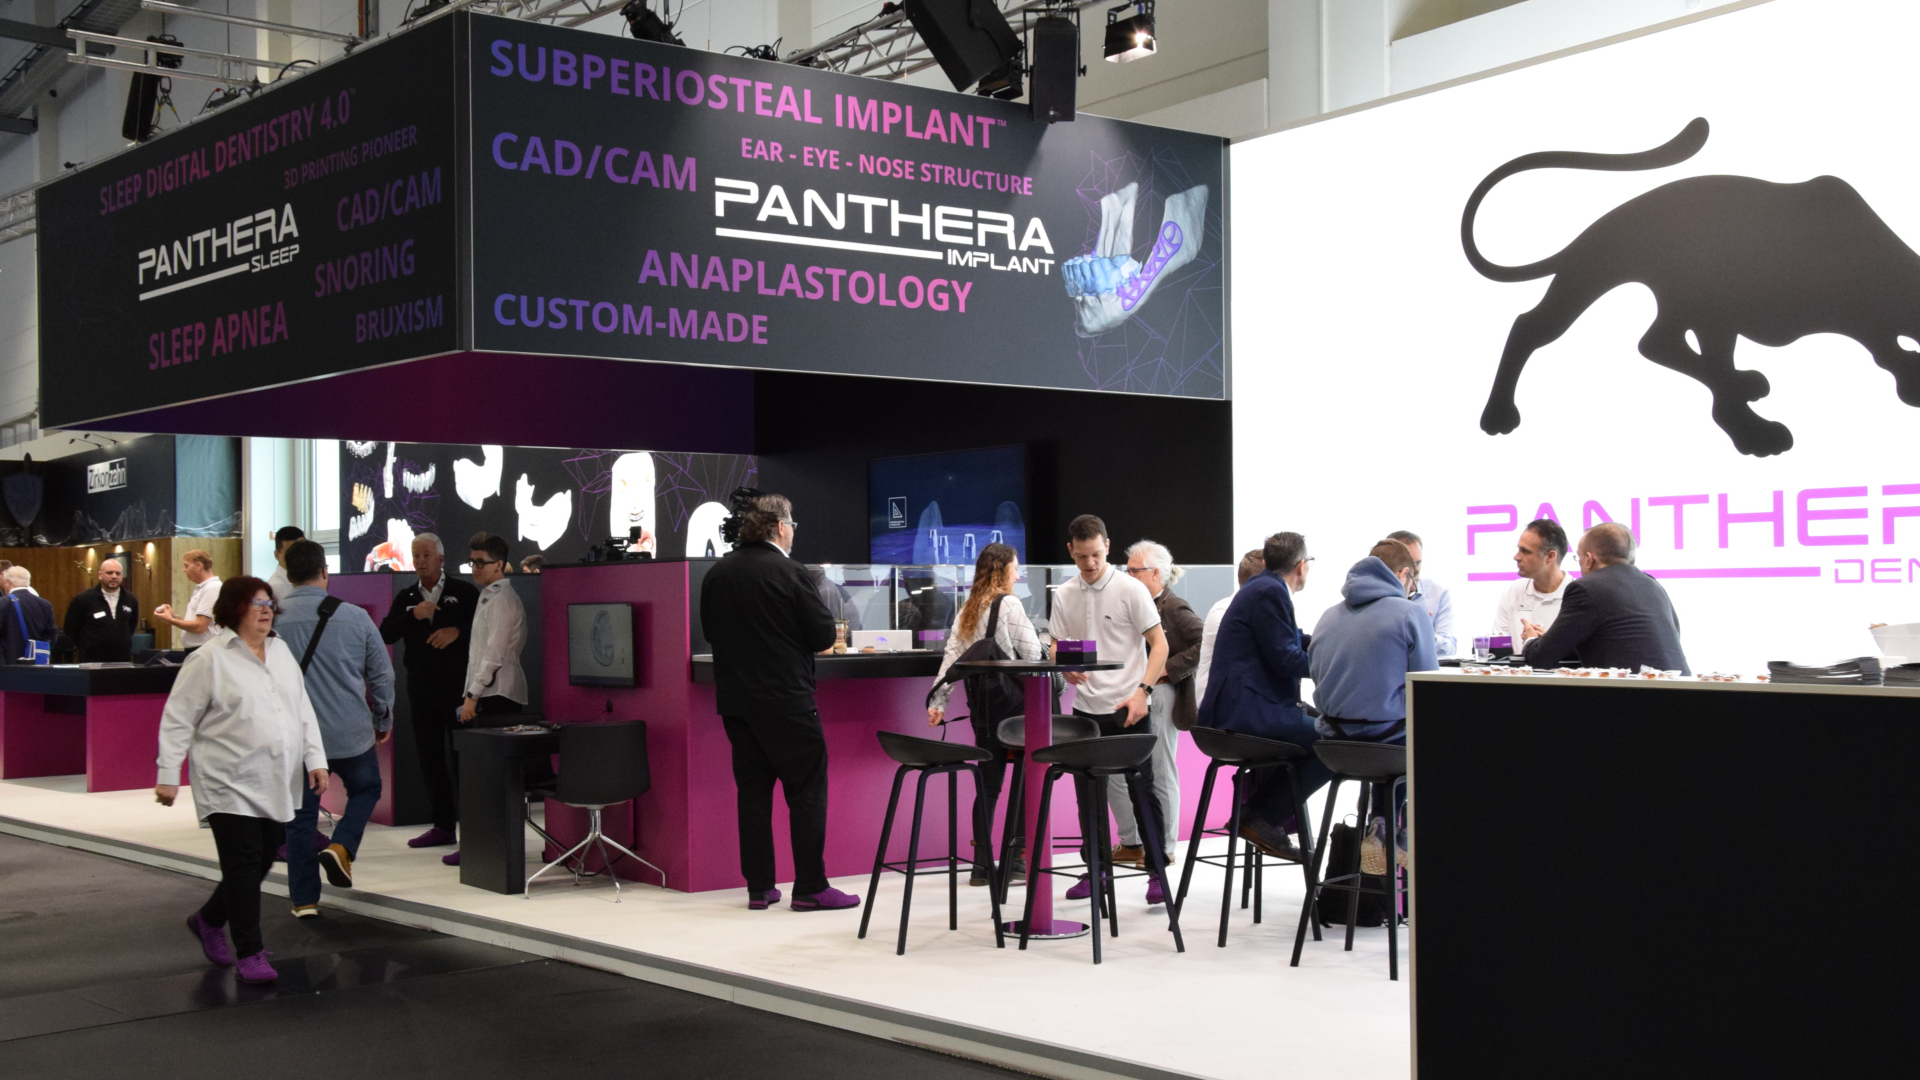 Panthera Dental booth (#D010) in Hall 1.2 at IDS.